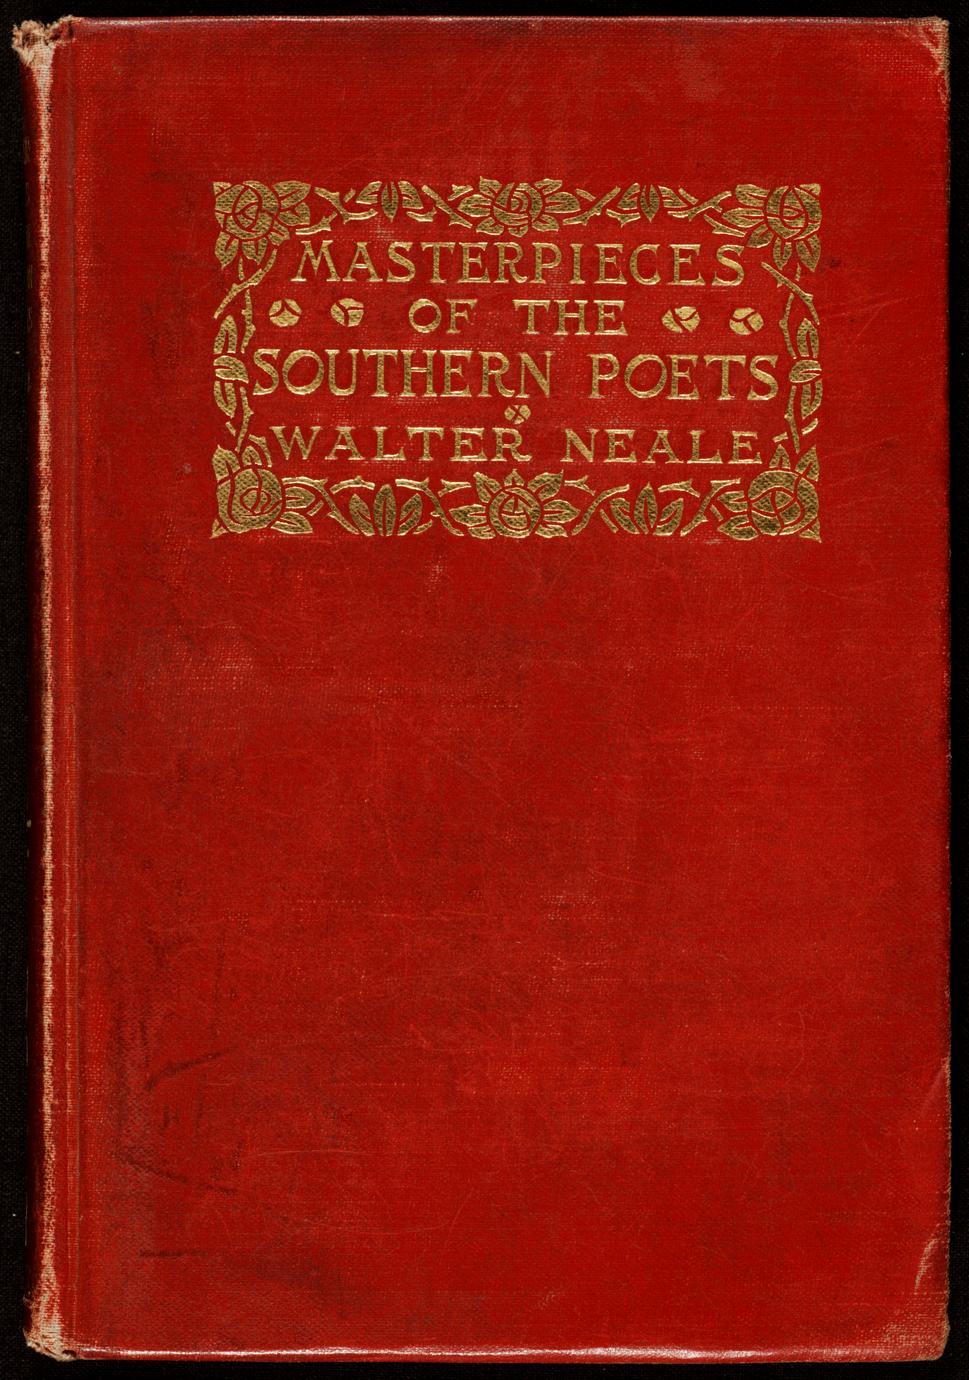 Masterpieces of the southern poets (1 of 2)